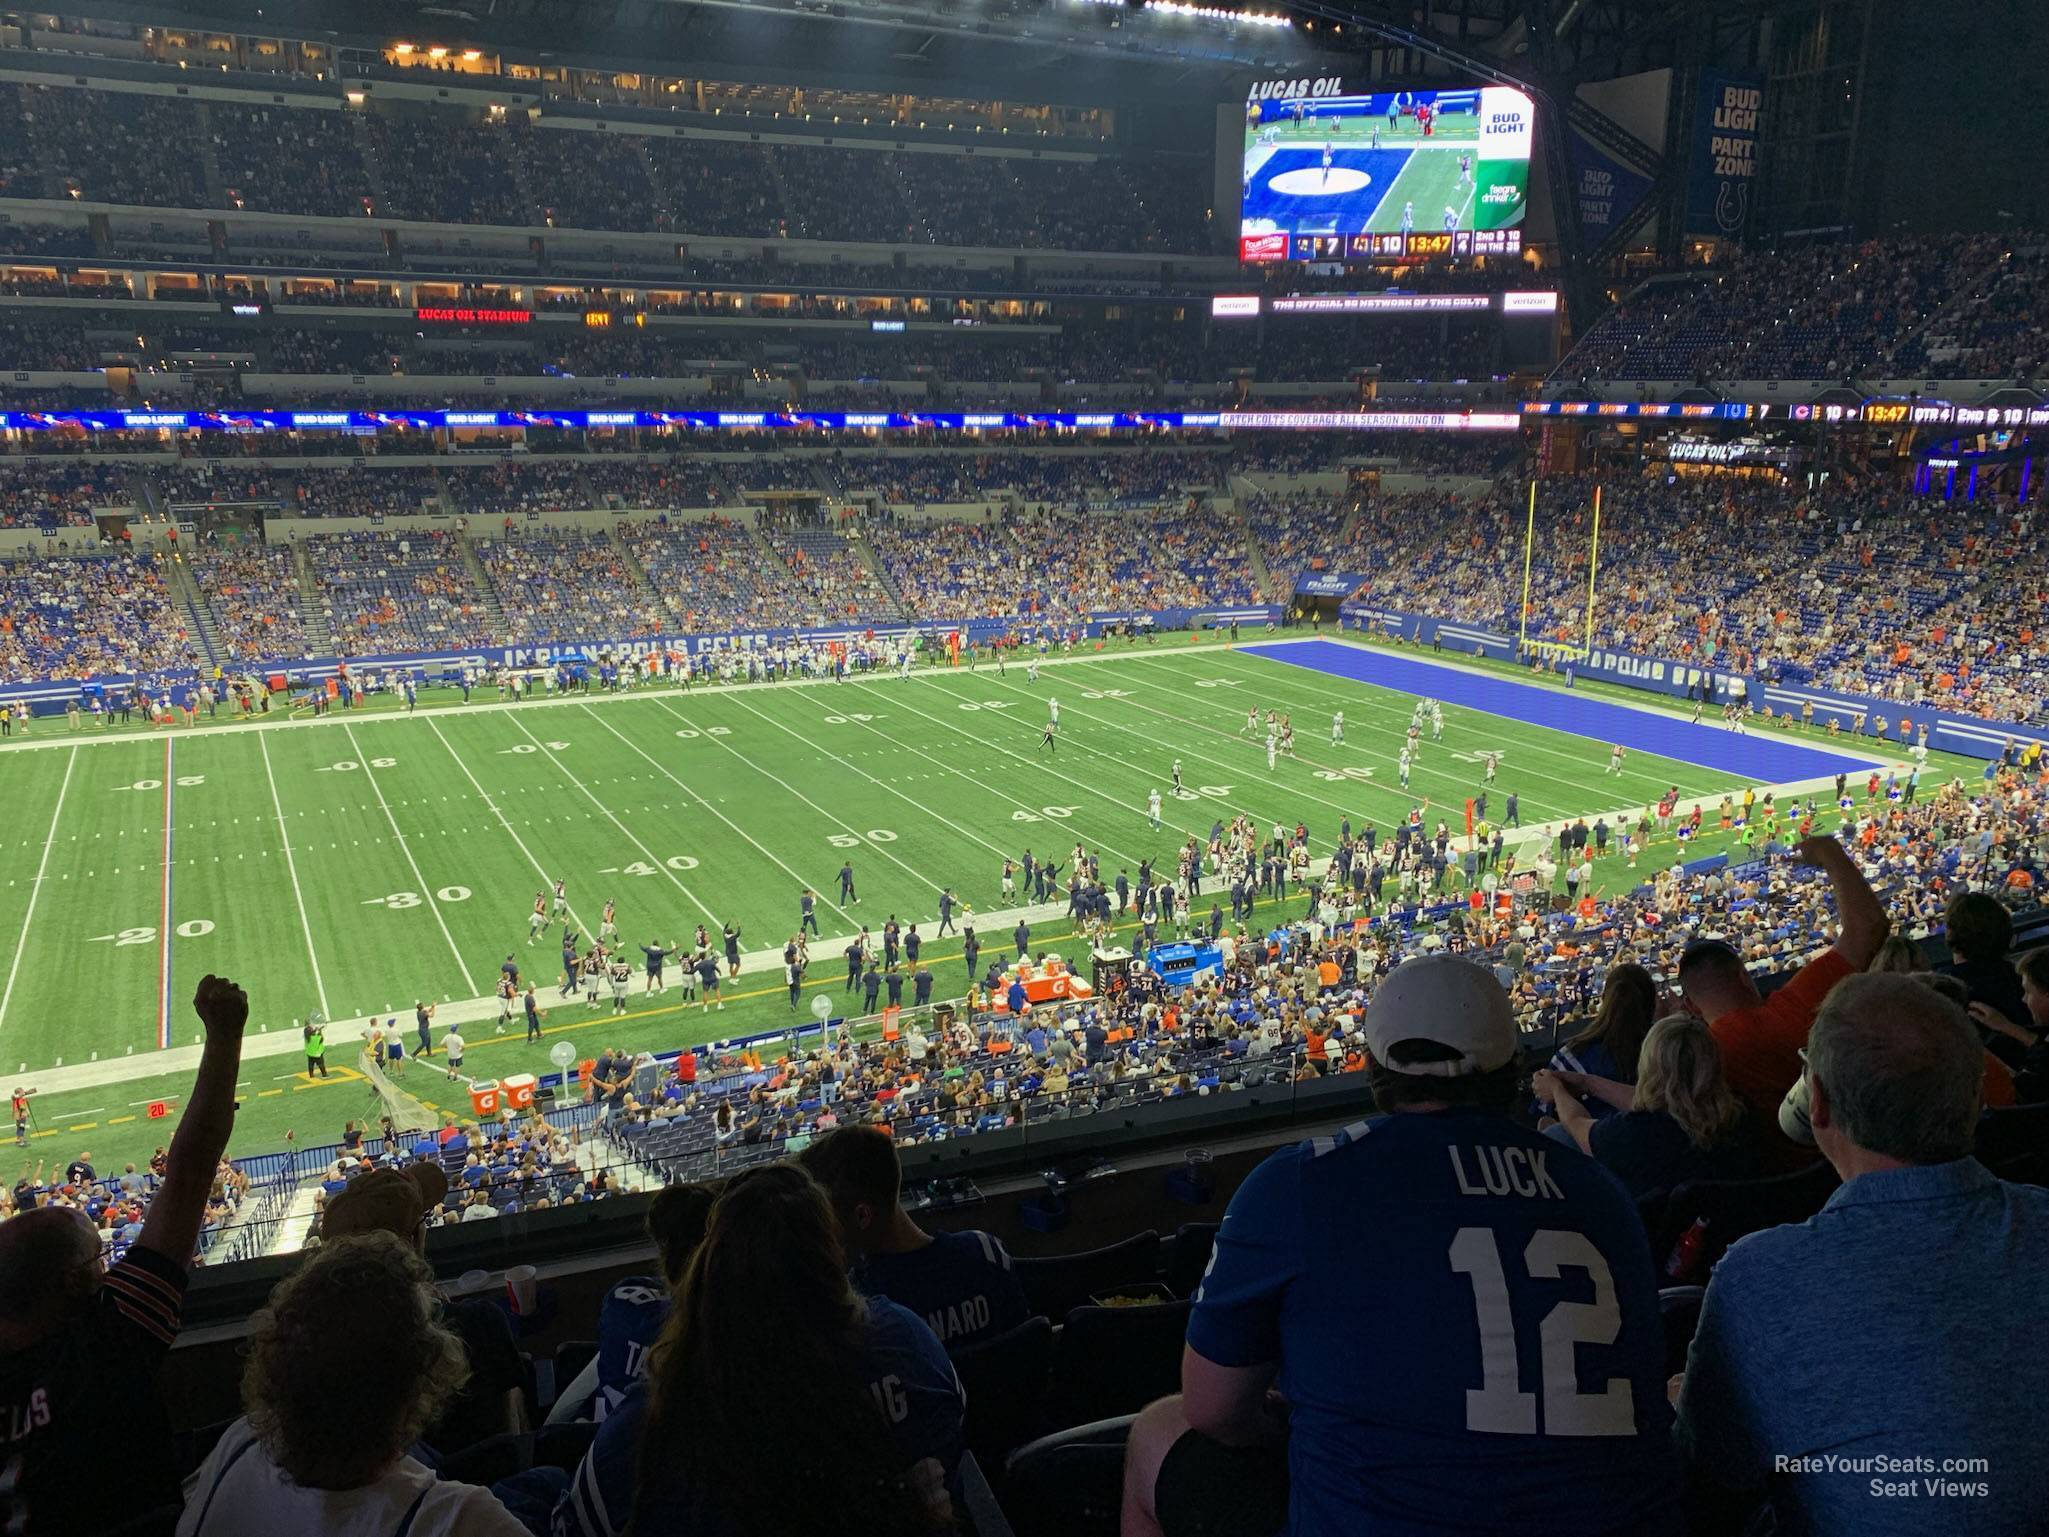 section 315, row last (2) seat view  for football - lucas oil stadium